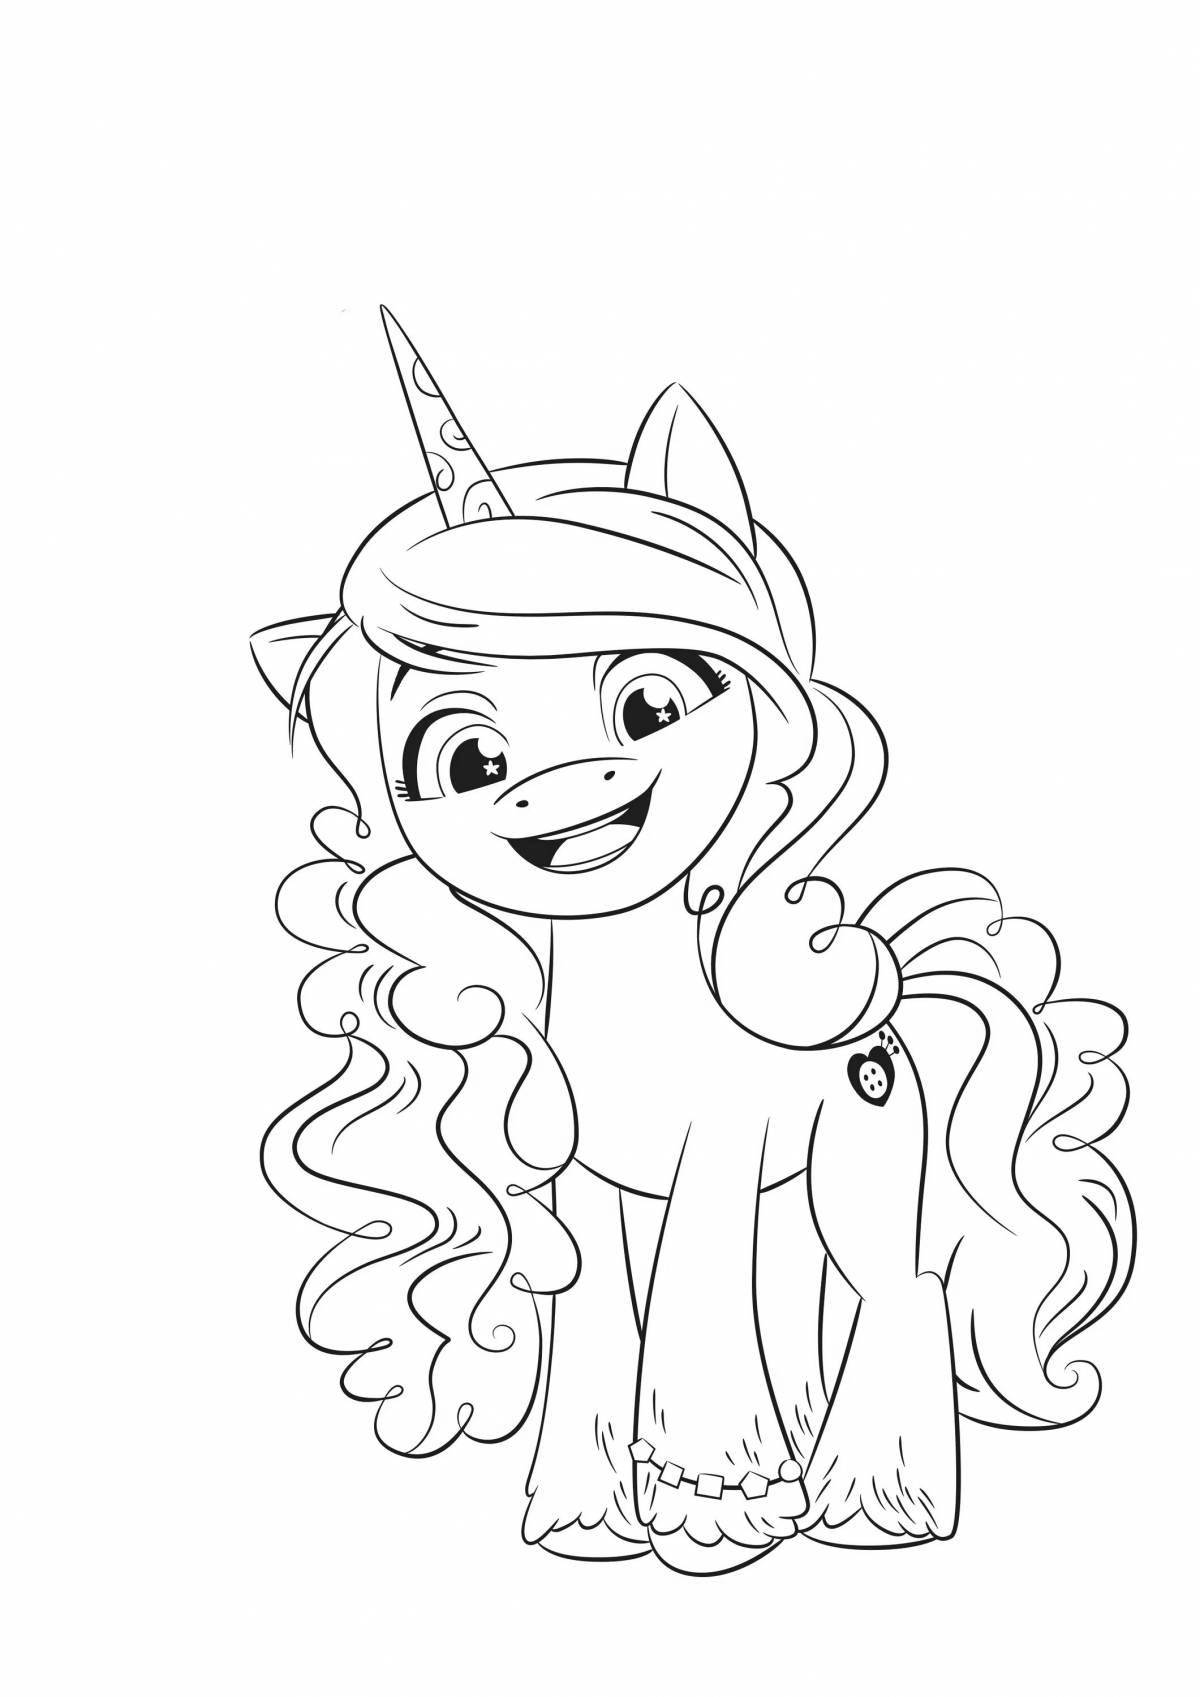 Amazing pip pony coloring page